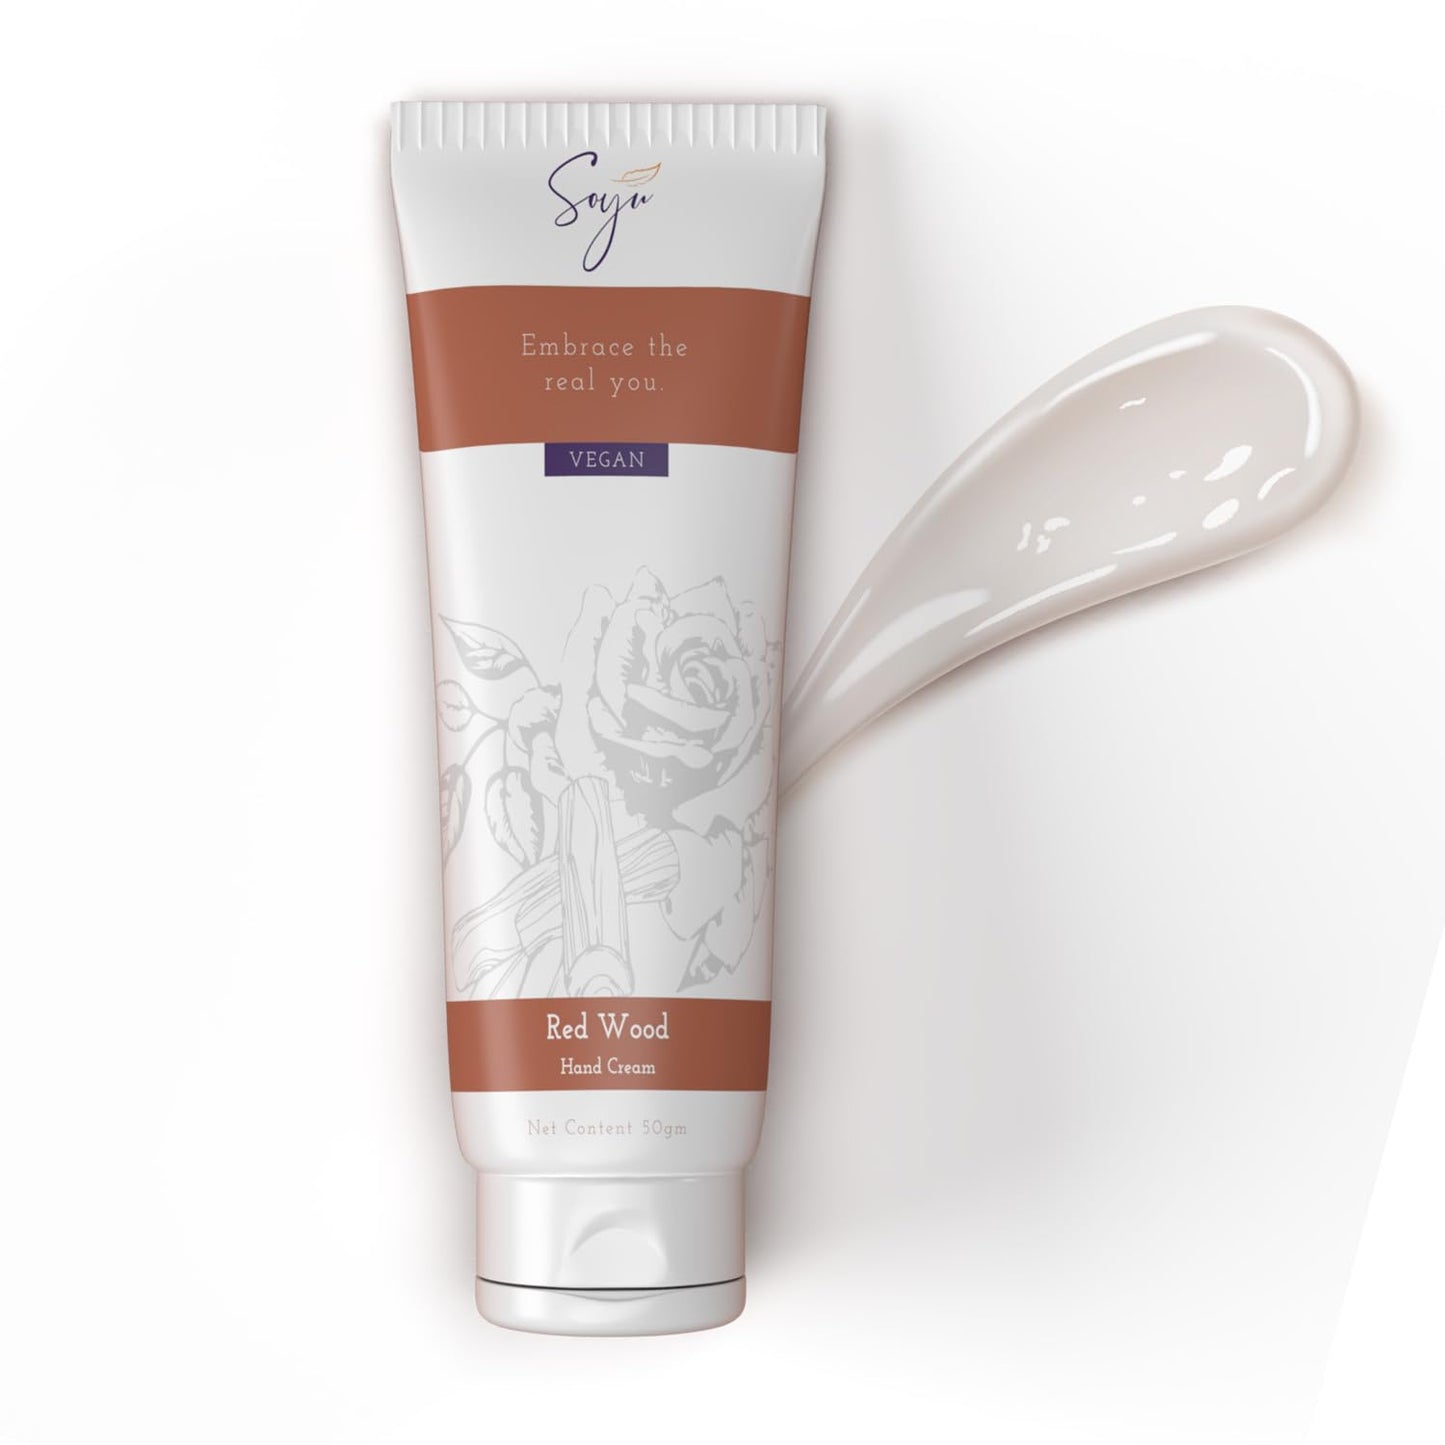 Soyu Hand Cream for Dry and Rough Hands | Formulated with Ceramides and Hyaluronic Acid | Non Sticky, Quick Absorption & Light Weight | Lily of the Valley Fragrance | Vegan & Cruelty Free (50 Gm)